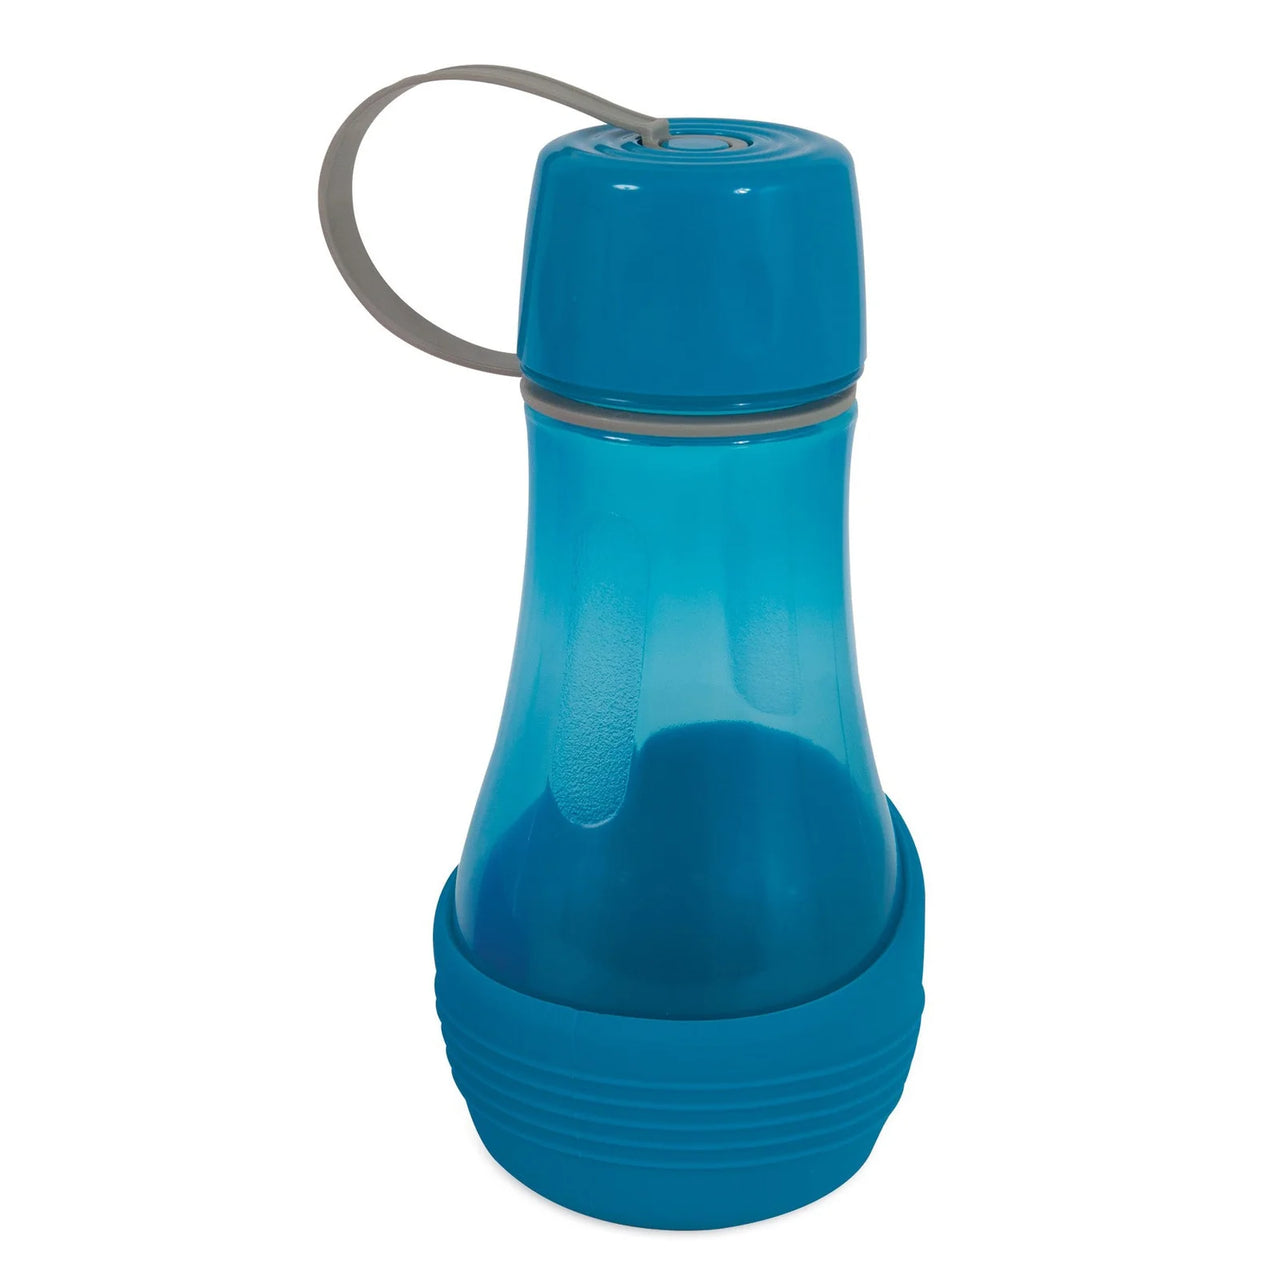 Petmate Replendish To-Go Travel Water Bottle